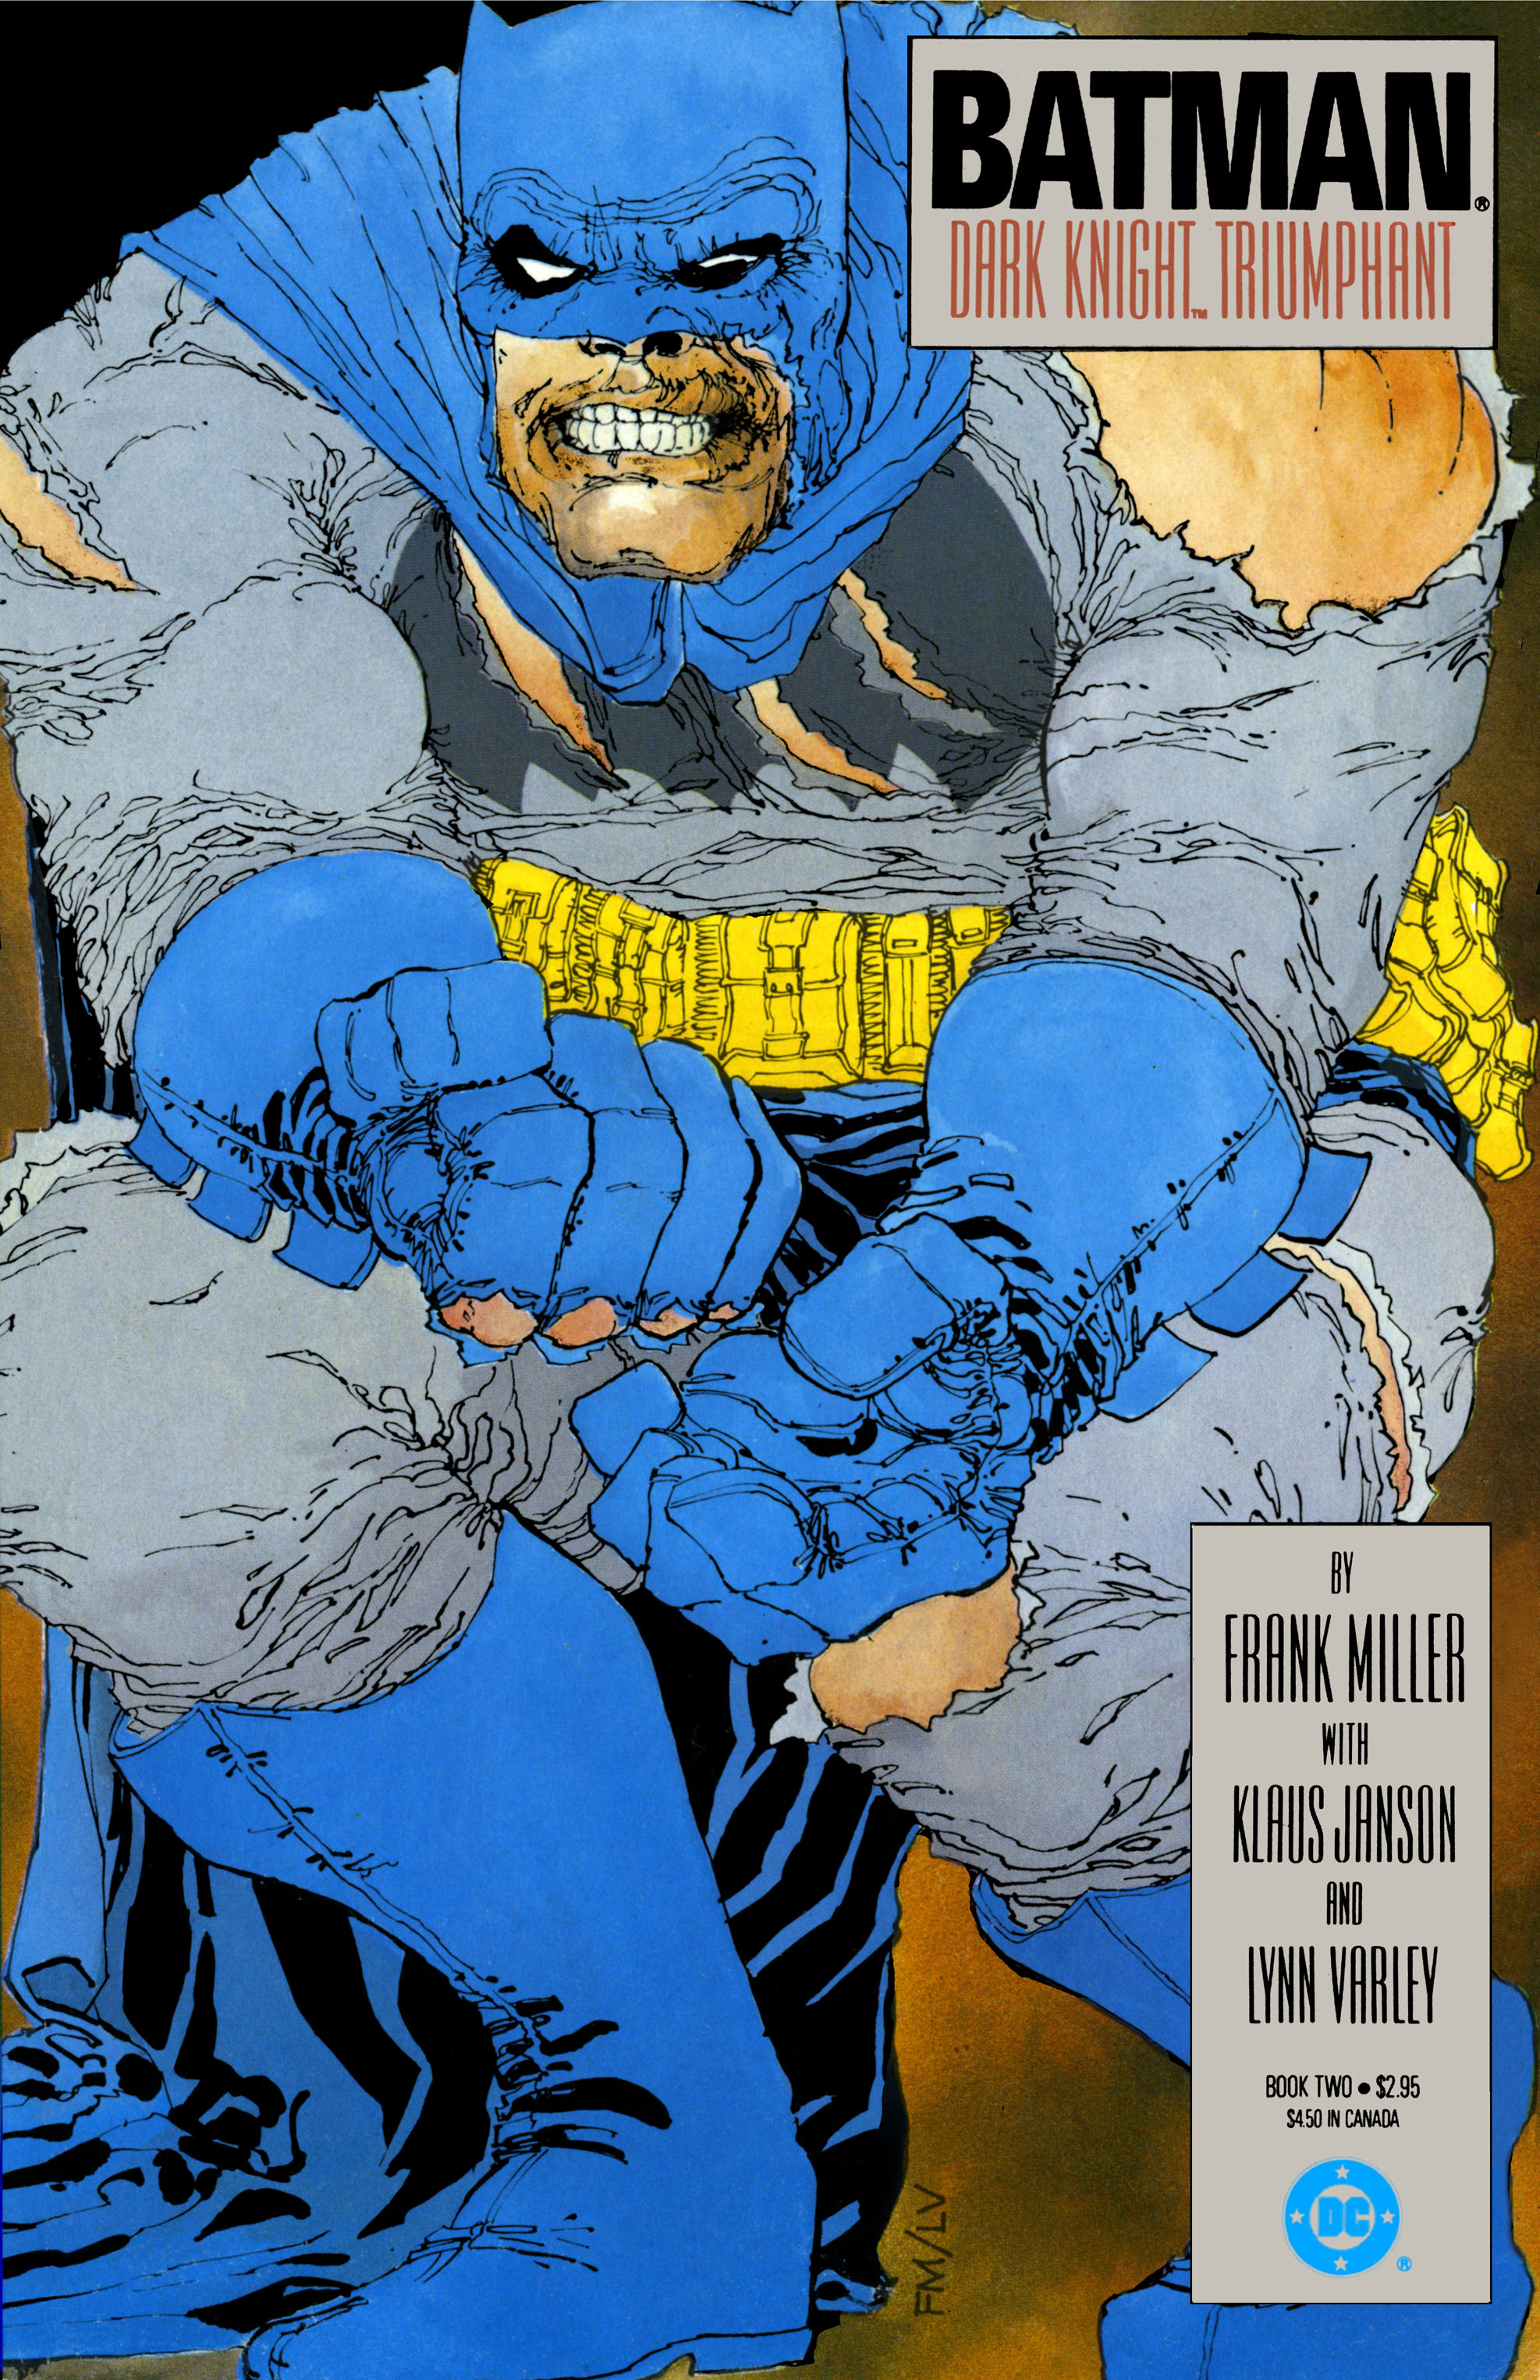 Batman The Dark Knight Returns Issue 2 | Read Batman The Dark Knight Returns  Issue 2 comic online in high quality. Read Full Comic online for free -  Read comics online in